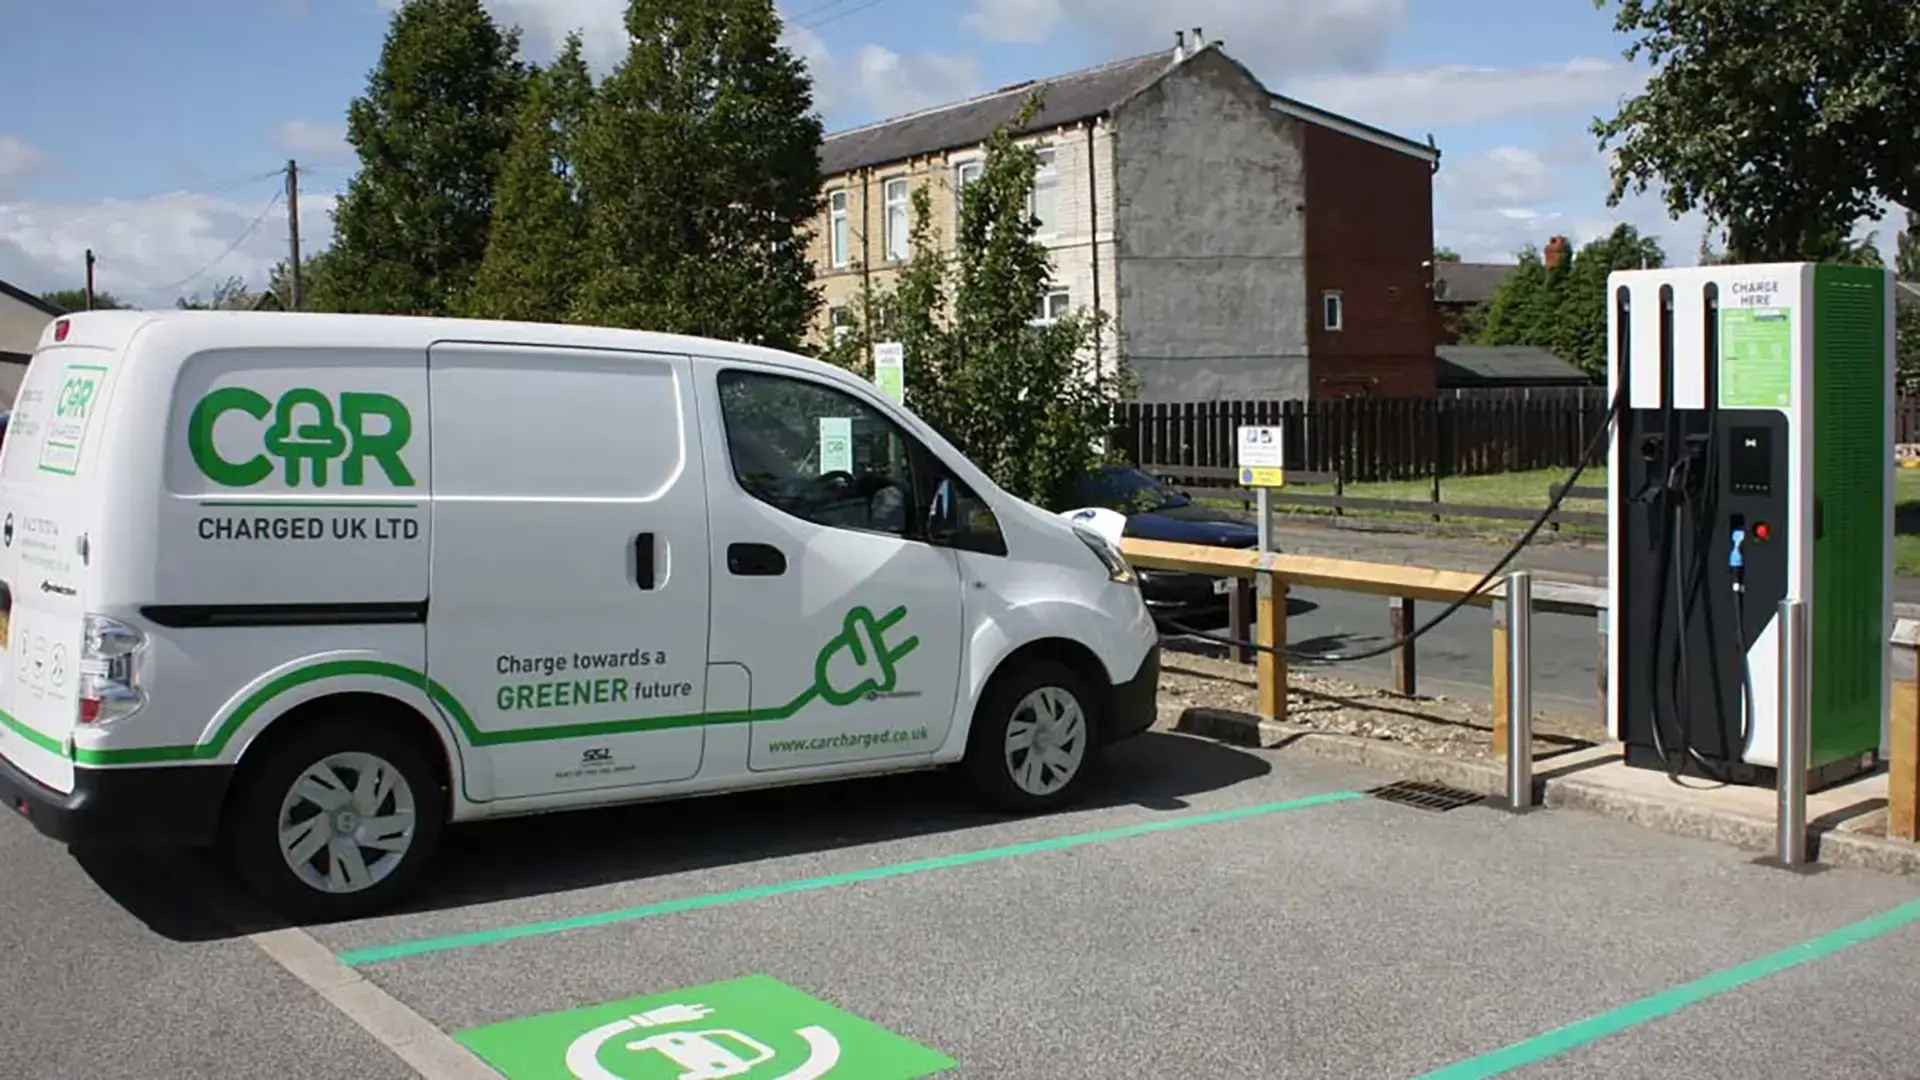 Car Charged UK electric van DC charger in parking lot